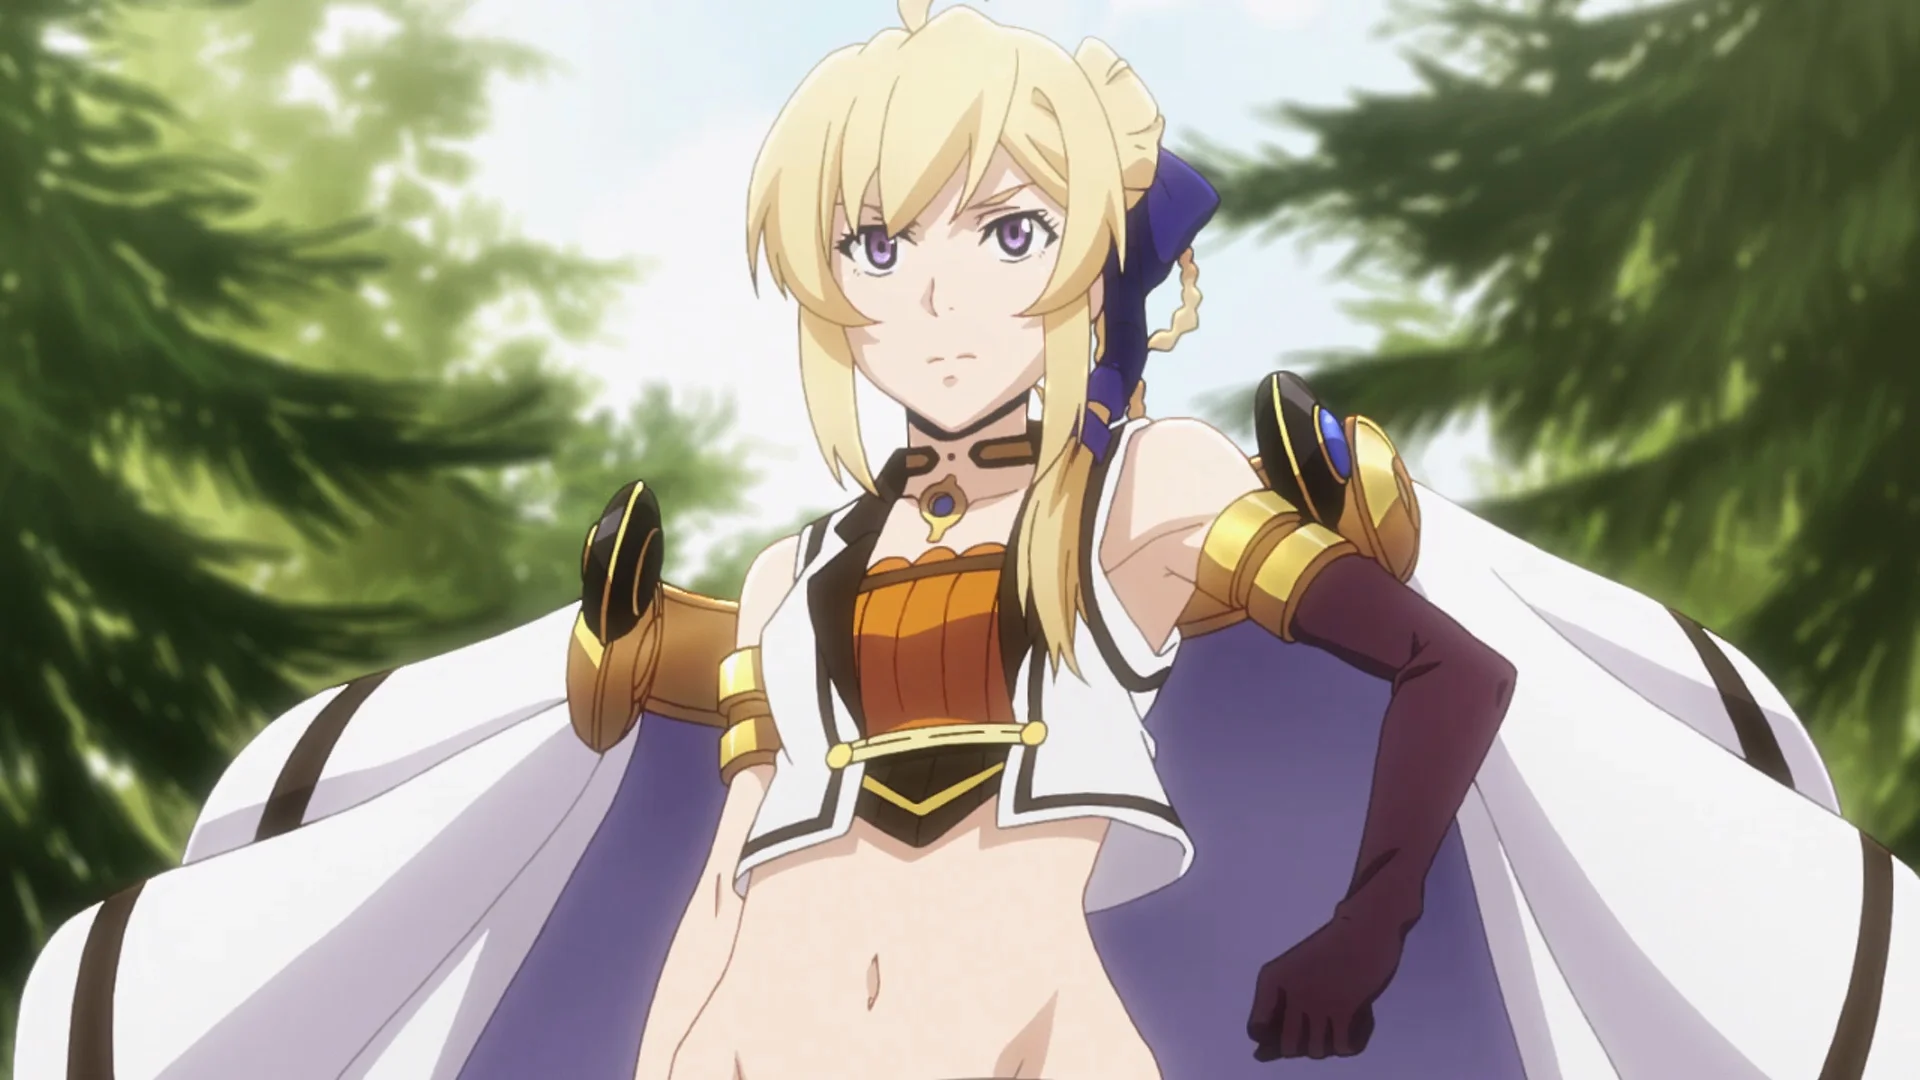 Bandits & Knights Populate The First 'Record of Grancrest War' Anime Clips